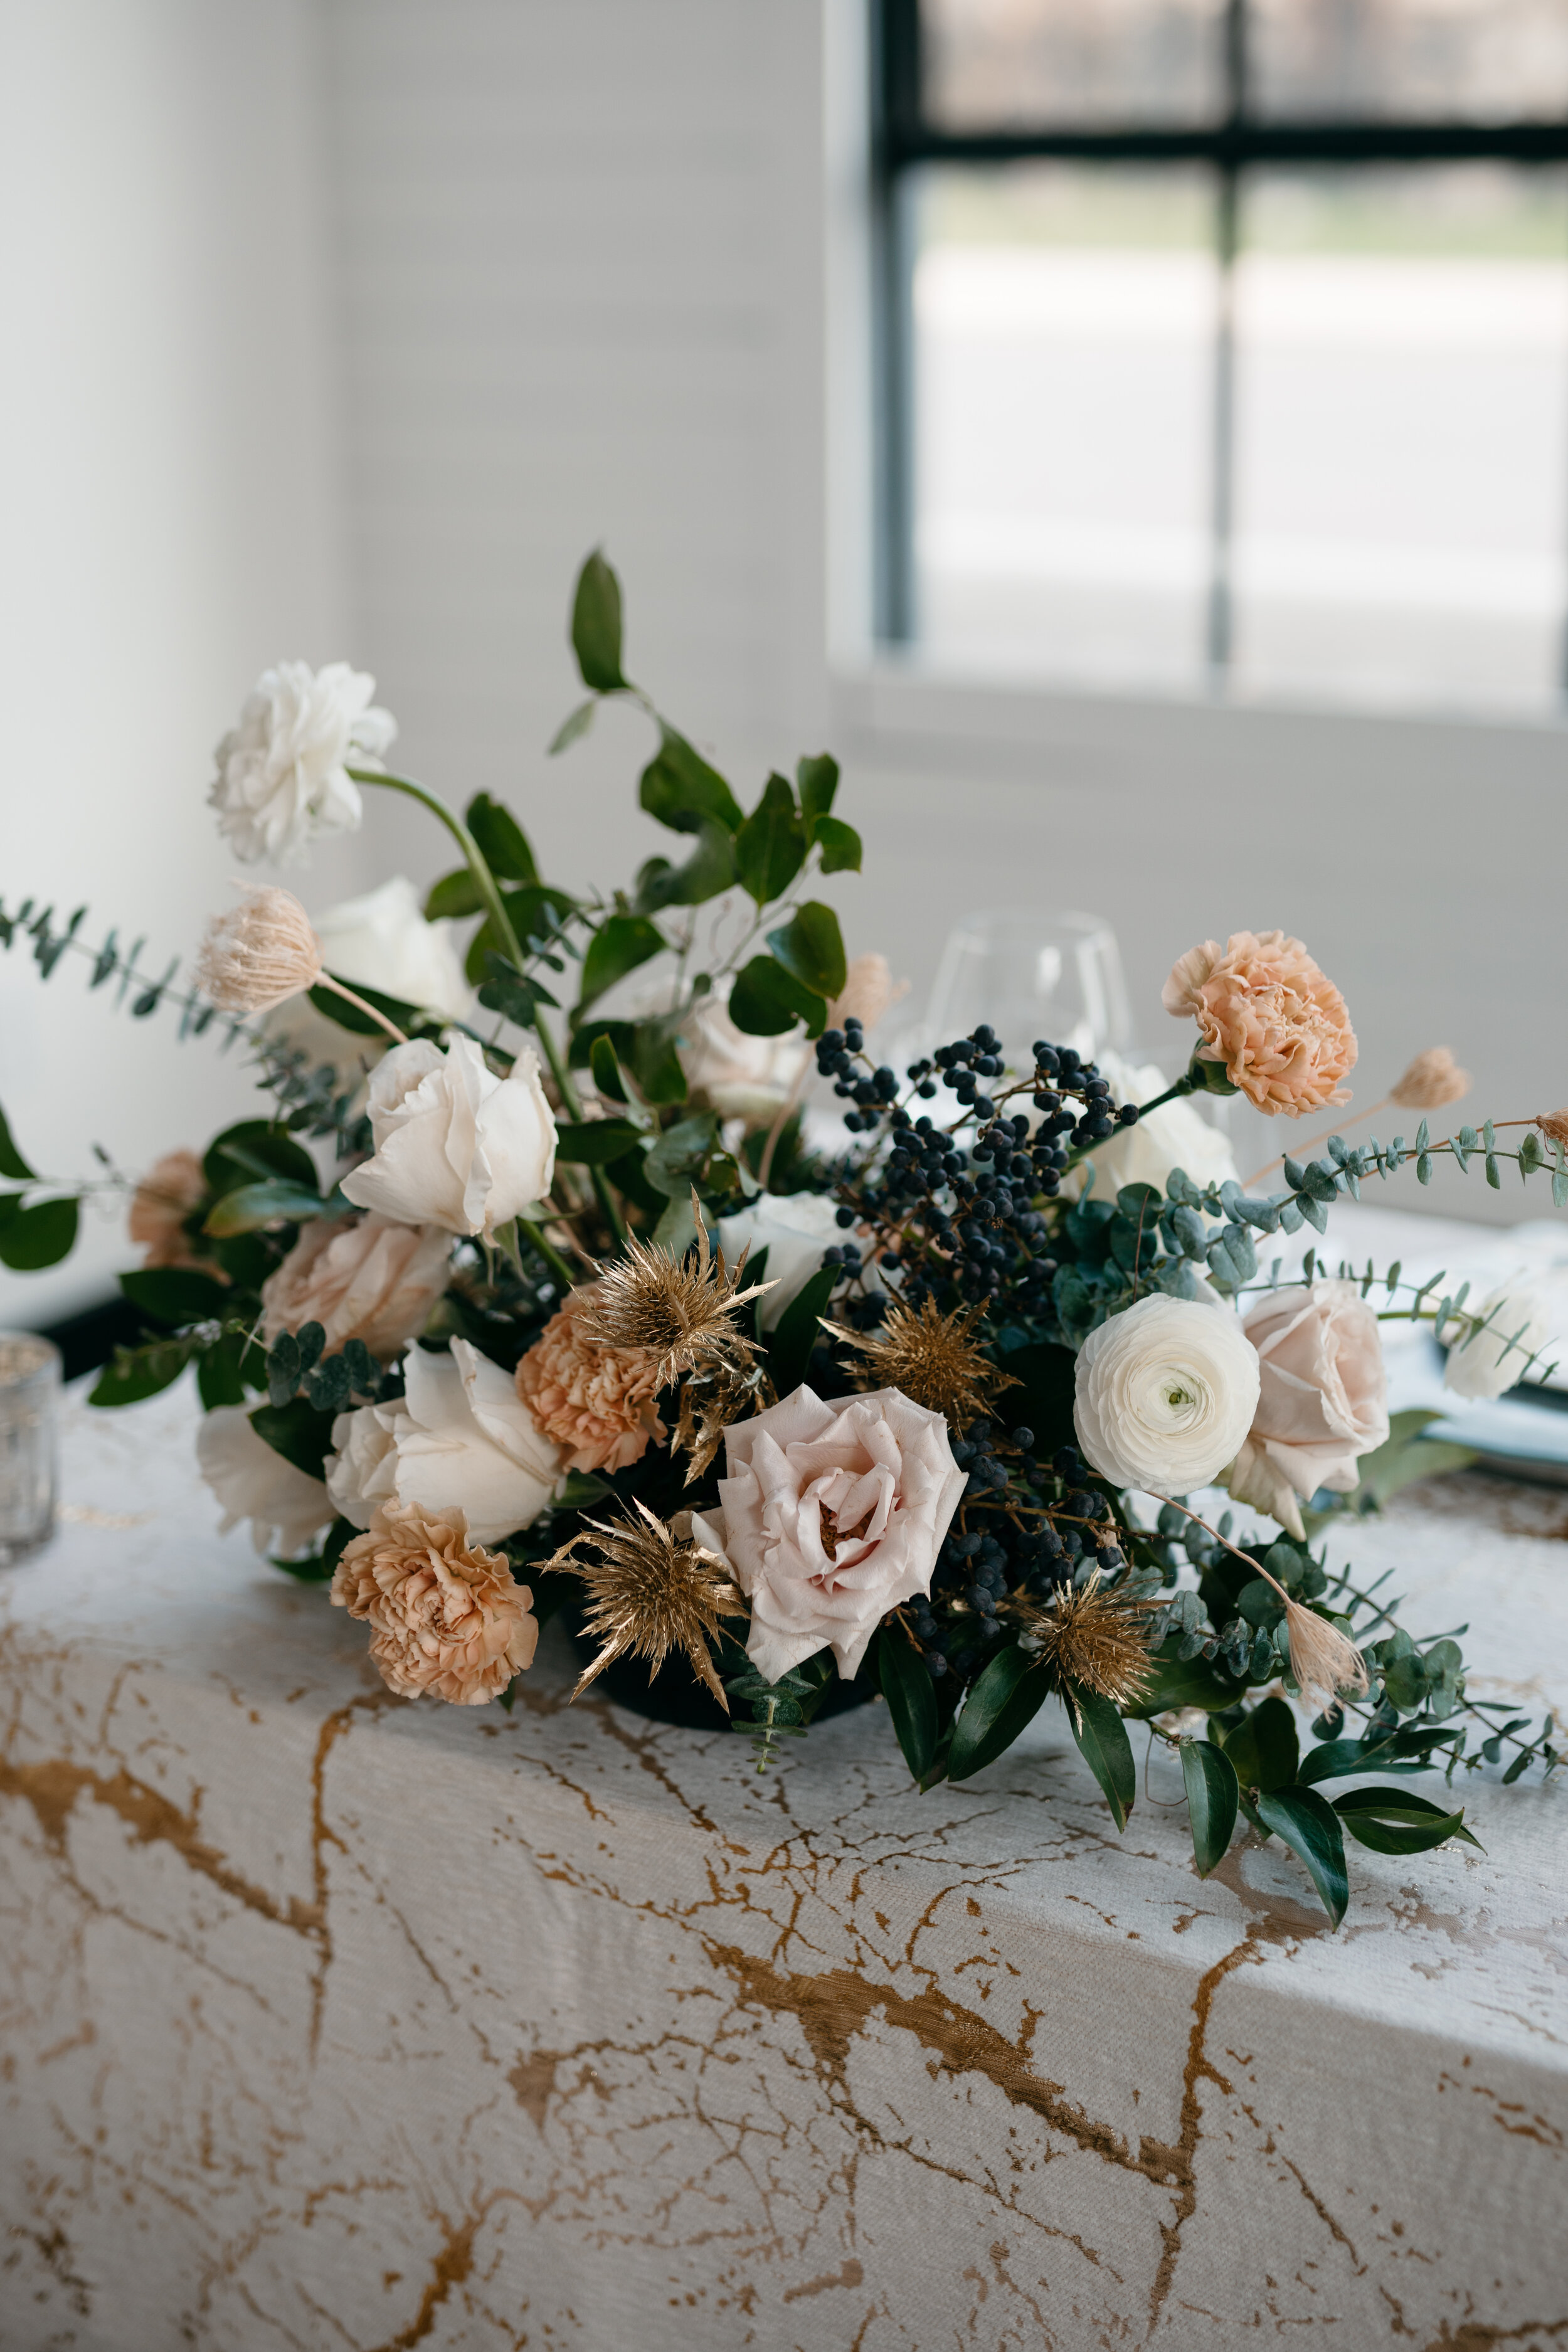 Winter inspiration centerpiece featuring white and blush roses, berries, touches of gold, baby eucalyptus, and lush greenery. Nashville wedding florist Rosemary & Finch at OZARI.